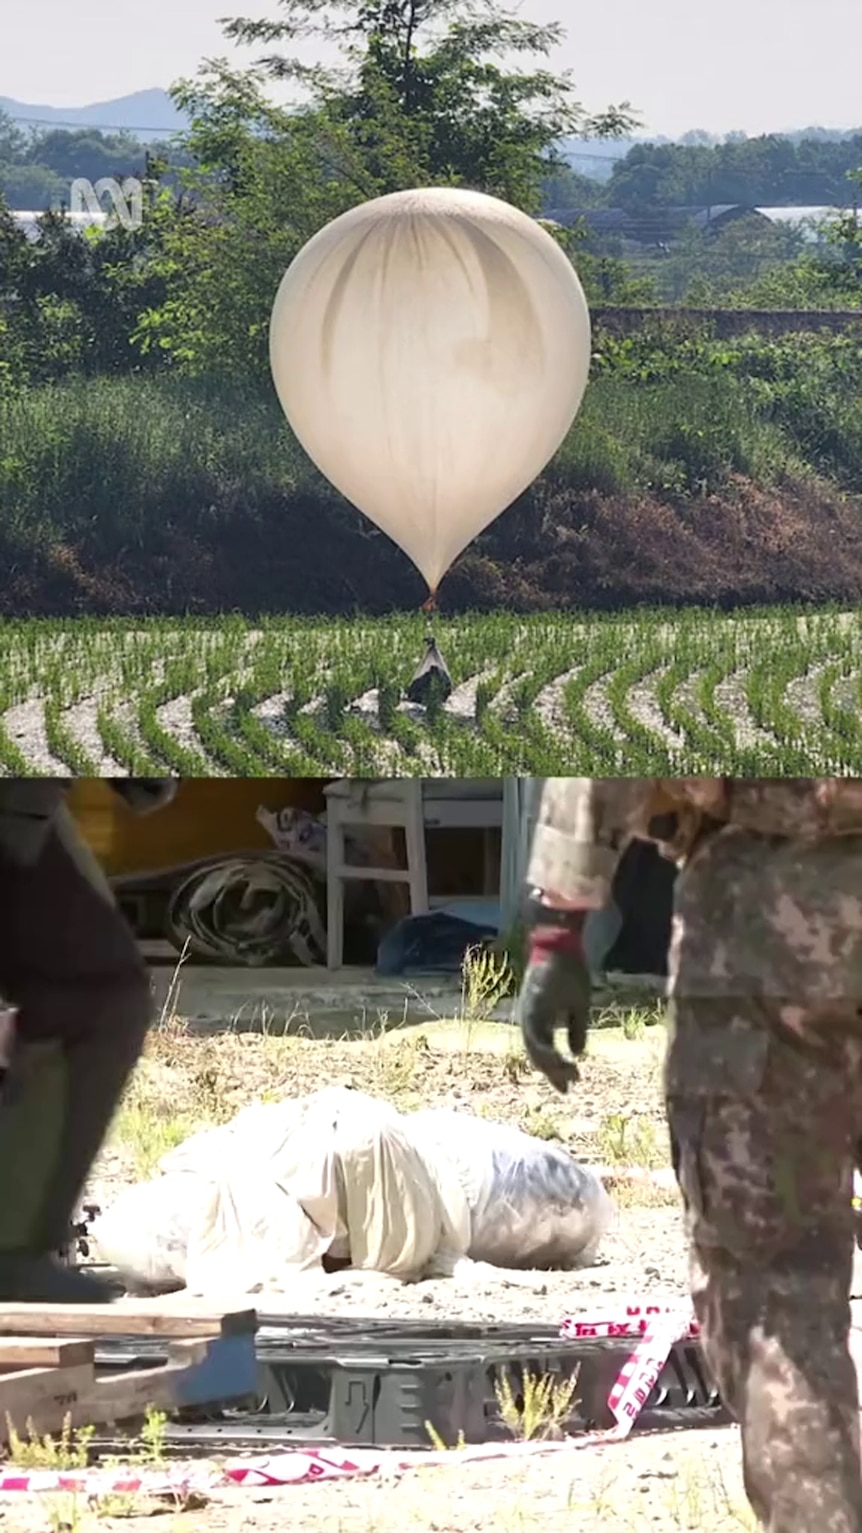 Composite shows a large white balloon in a rice paddy and figures in fatigues walking towards something wrapped in light fabric